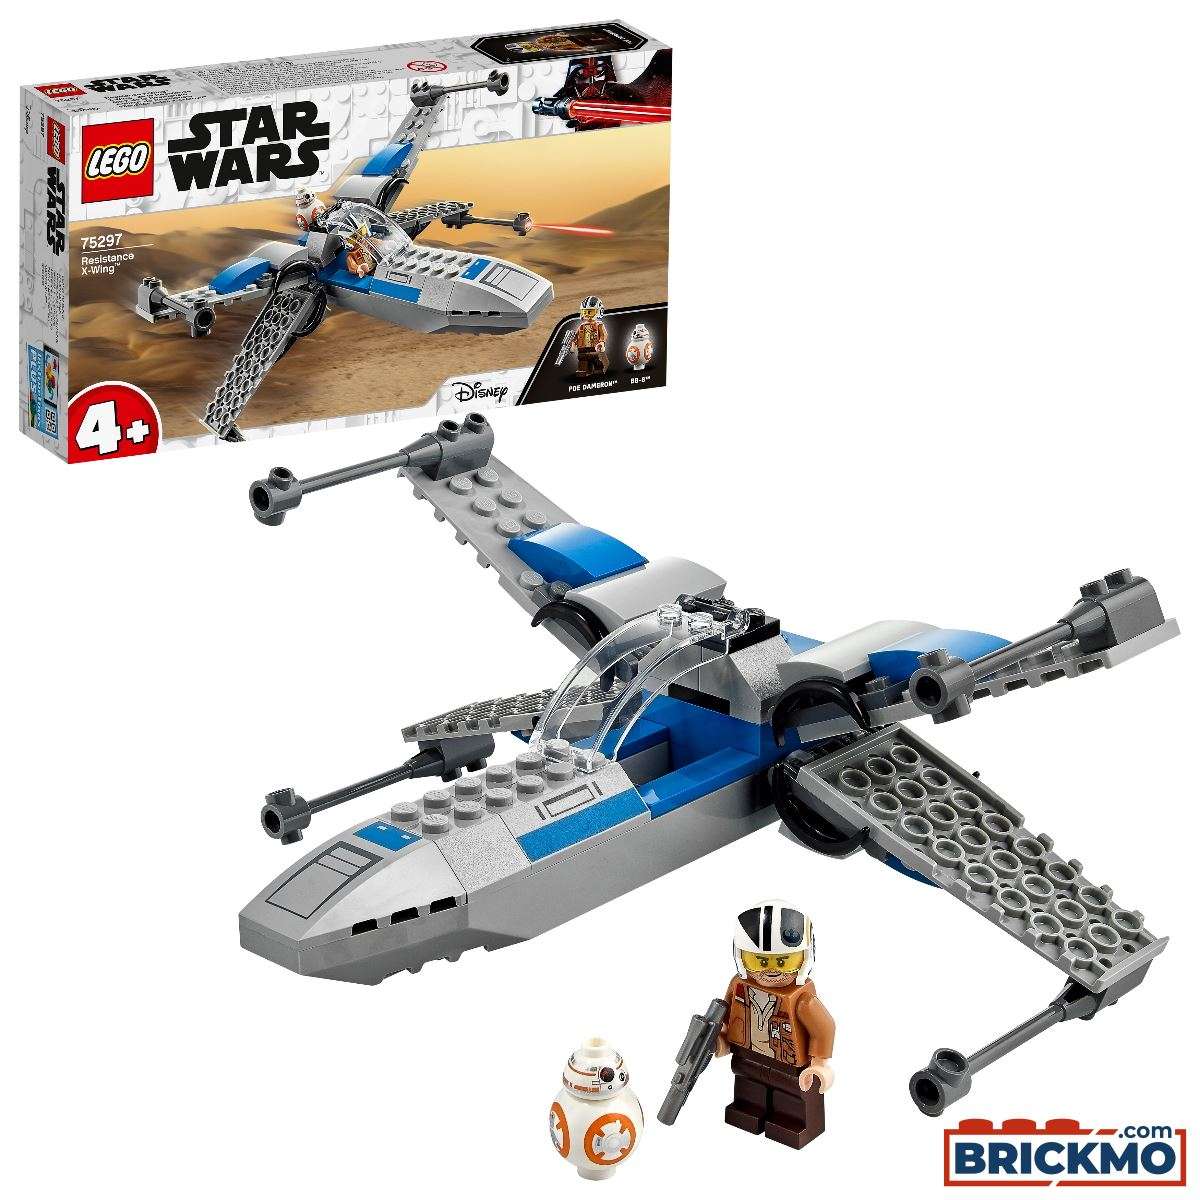 LEGO Star Wars 75297 Resistance X-Wing 75297